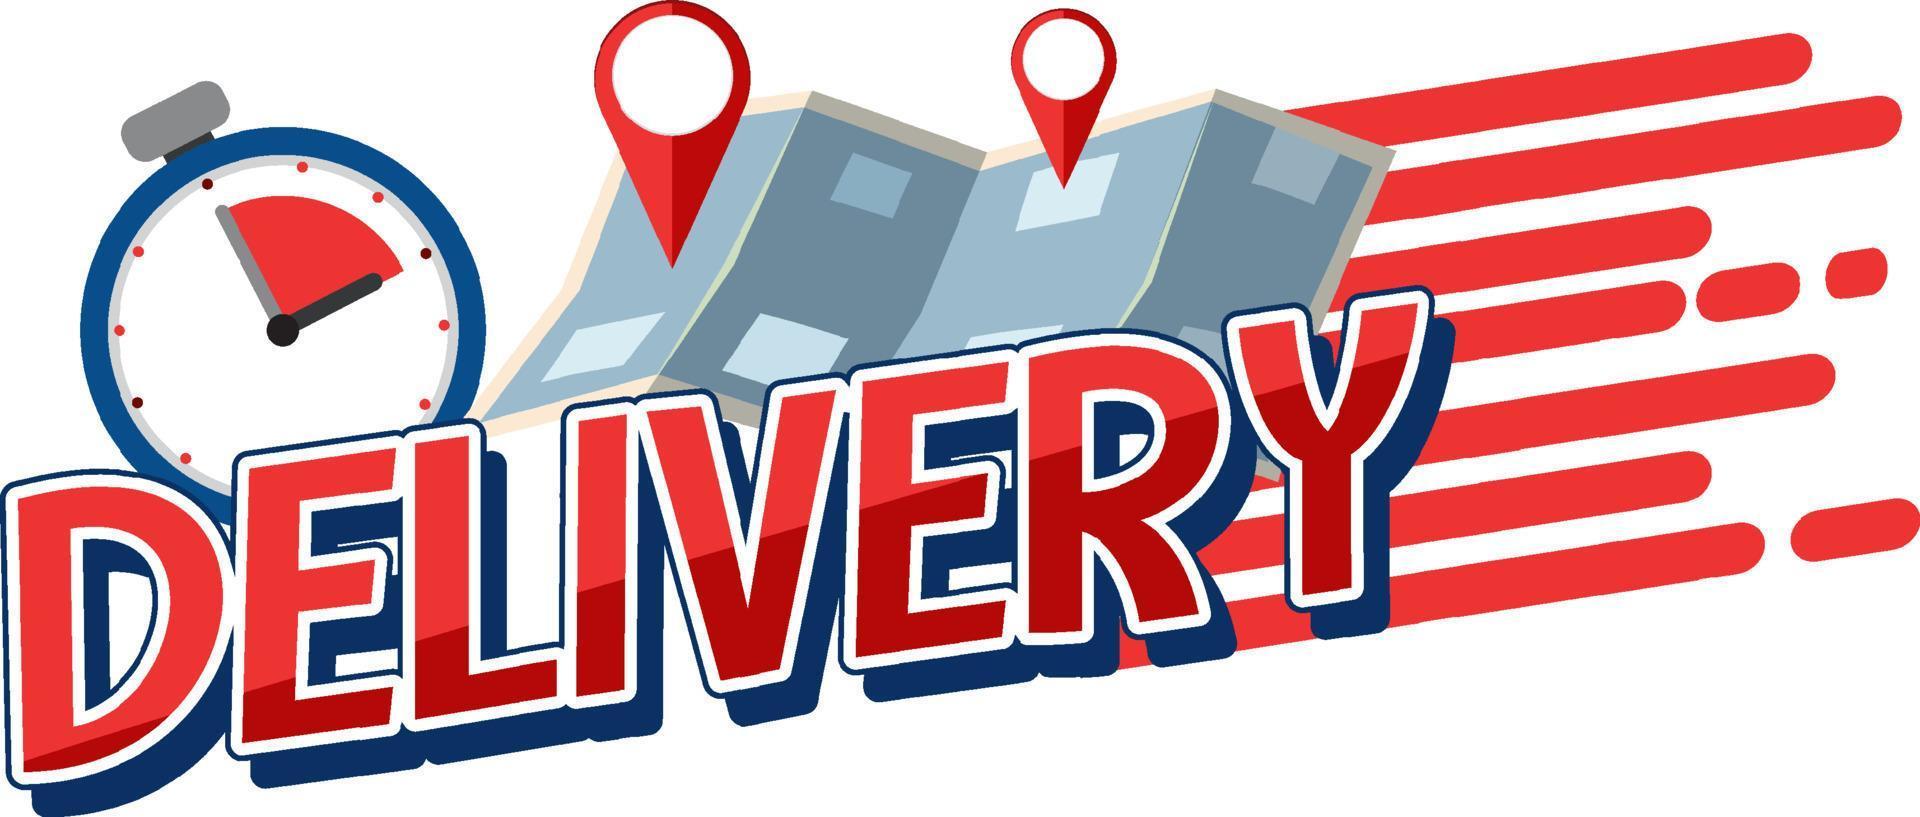 Delivery logo with clock and pinned map vector